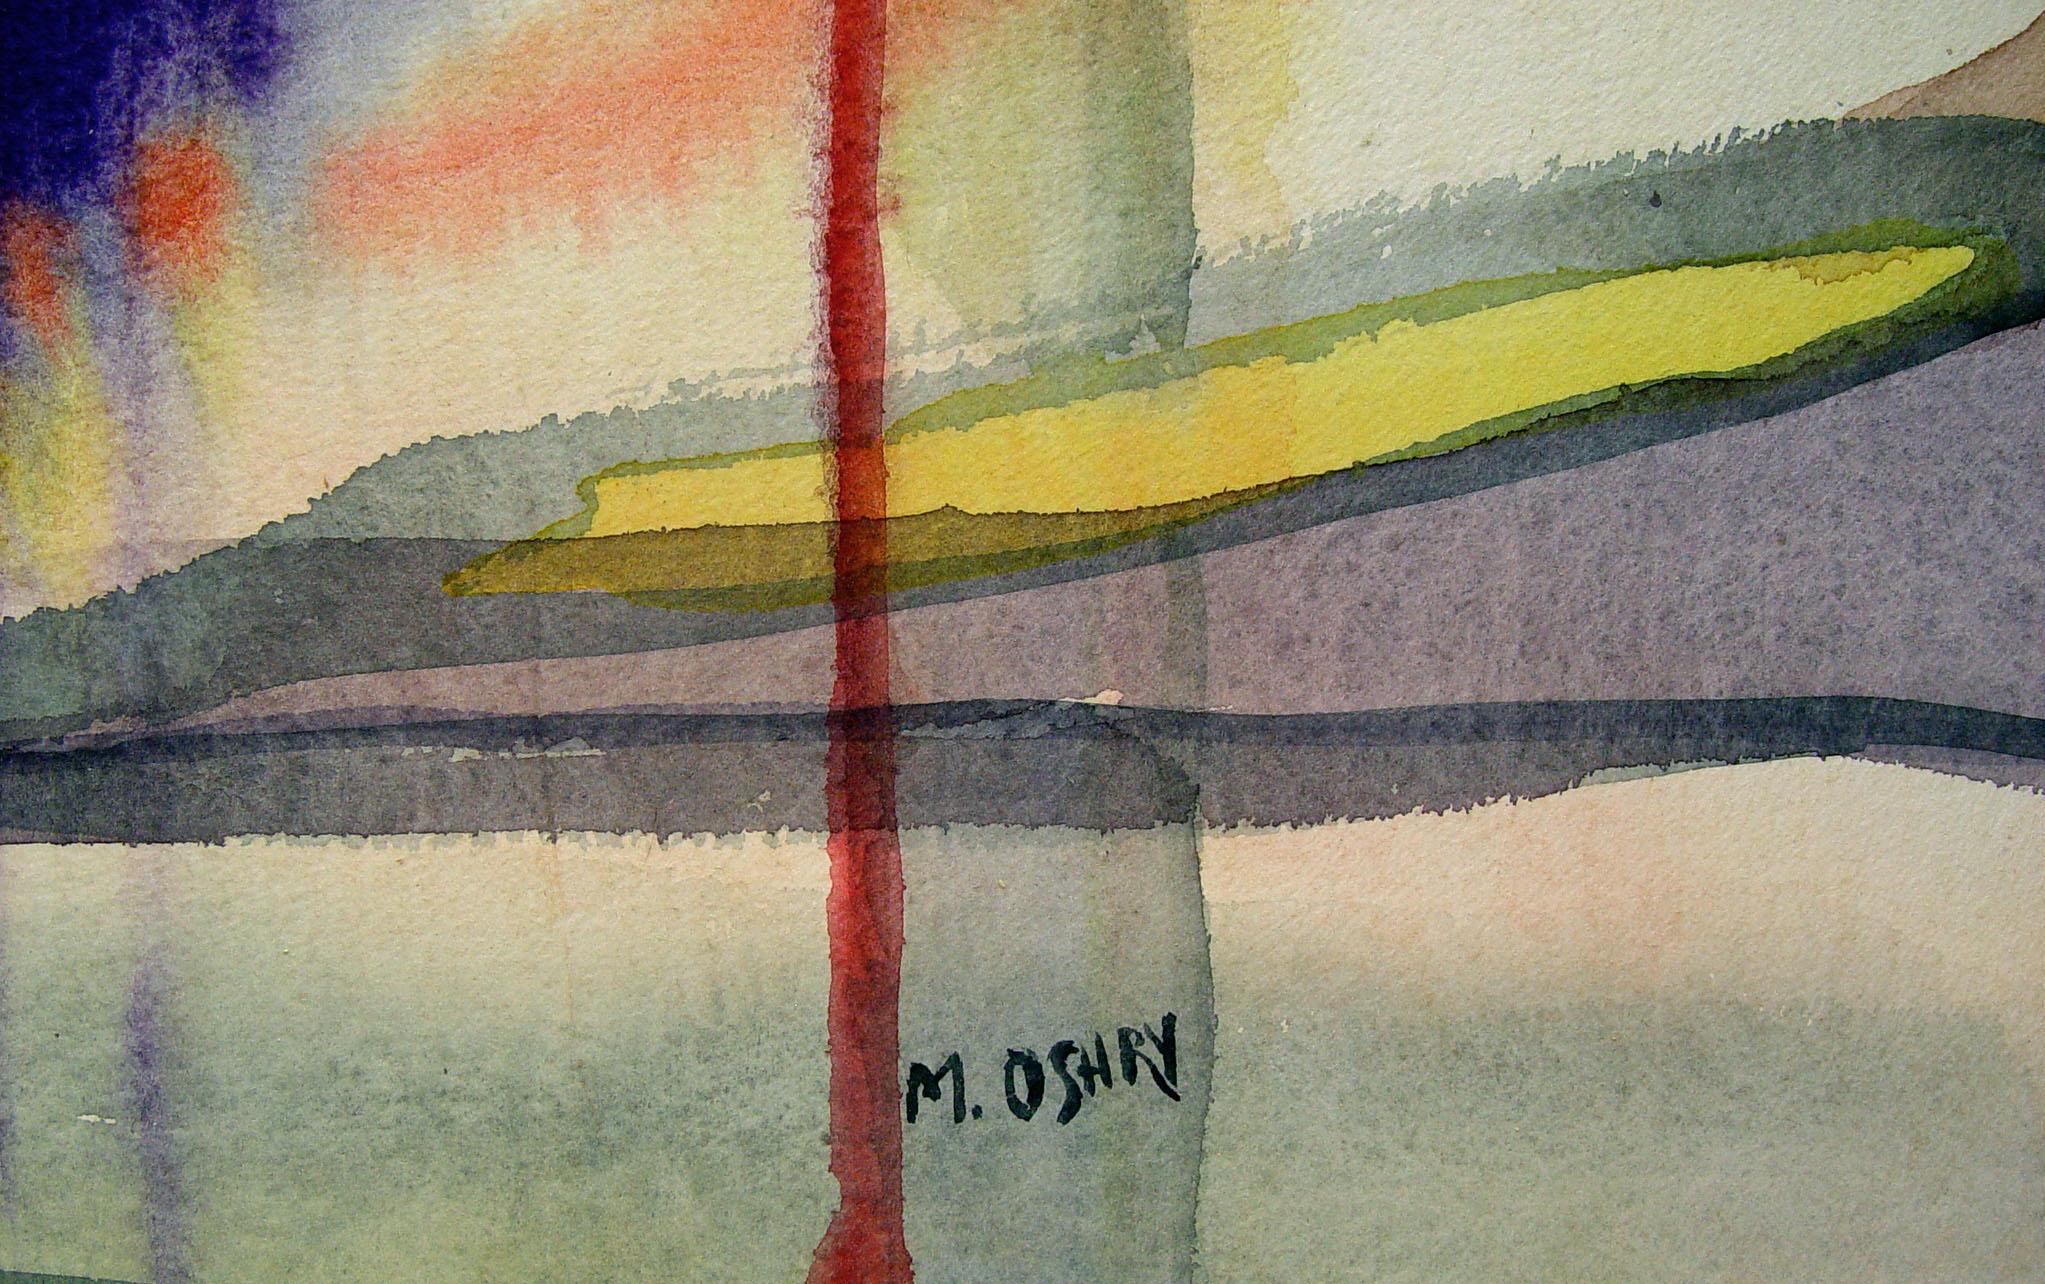 Vintage mid century watercolor on paper abstract by Marguerite Oshry (20th century), Texas. Unframed, displayed mounted to original backing, edge wear.